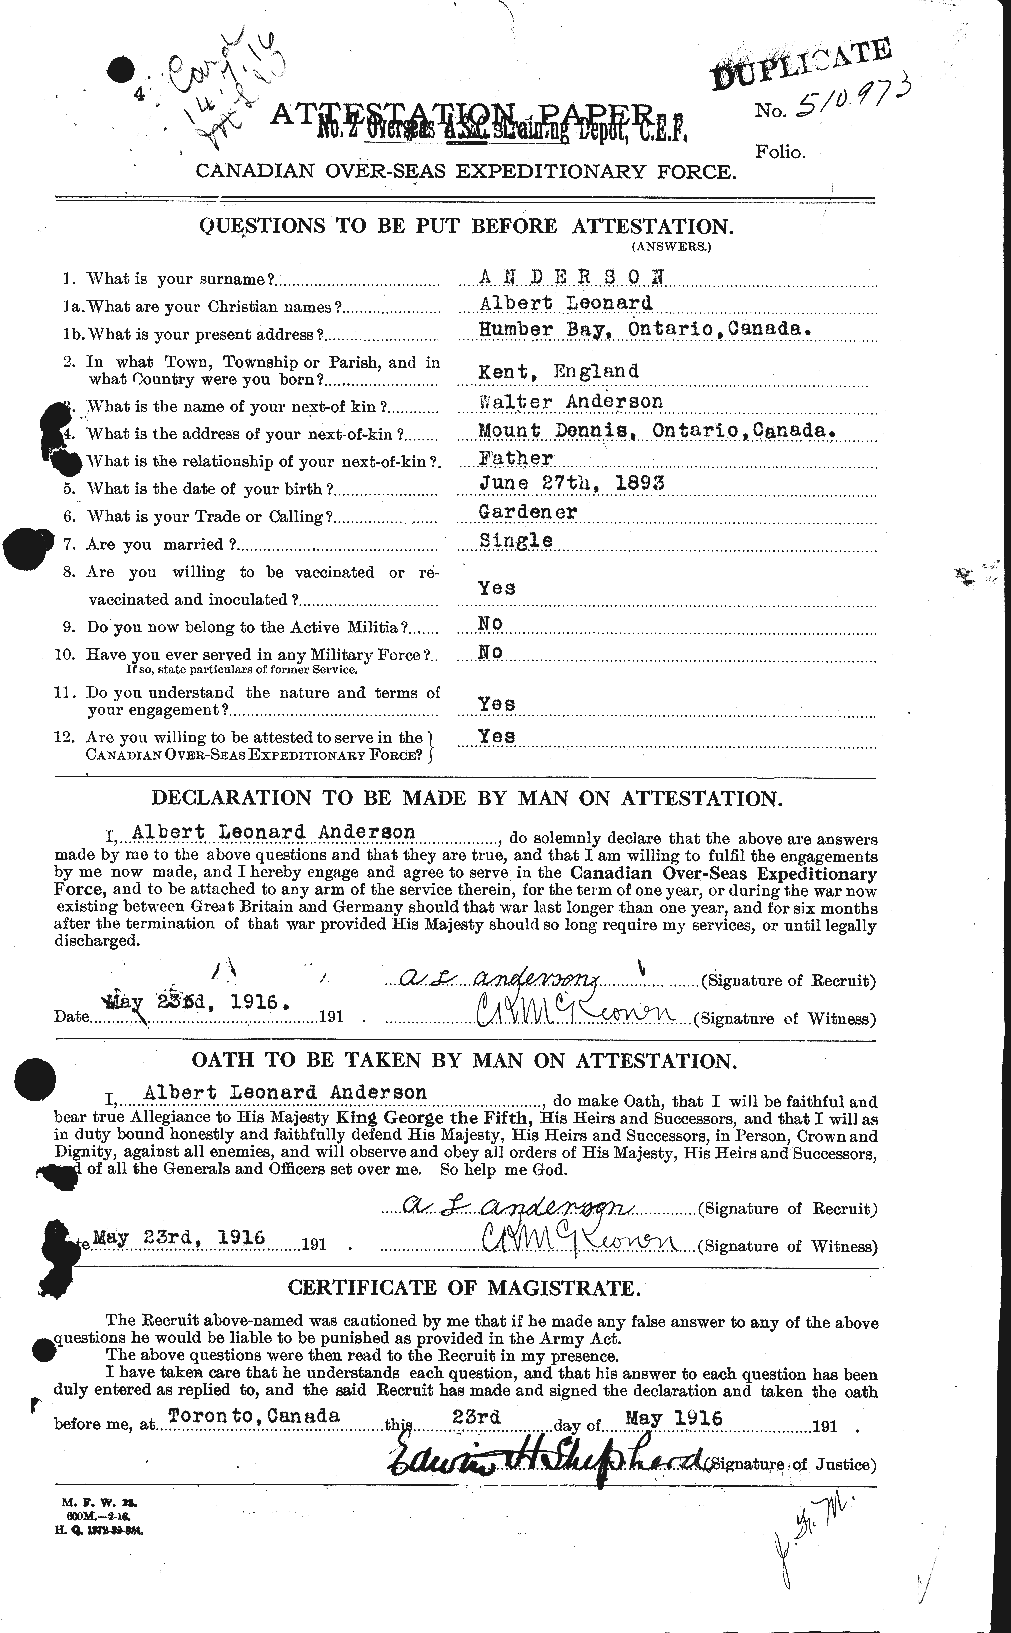 Personnel Records of the First World War - CEF 209540a